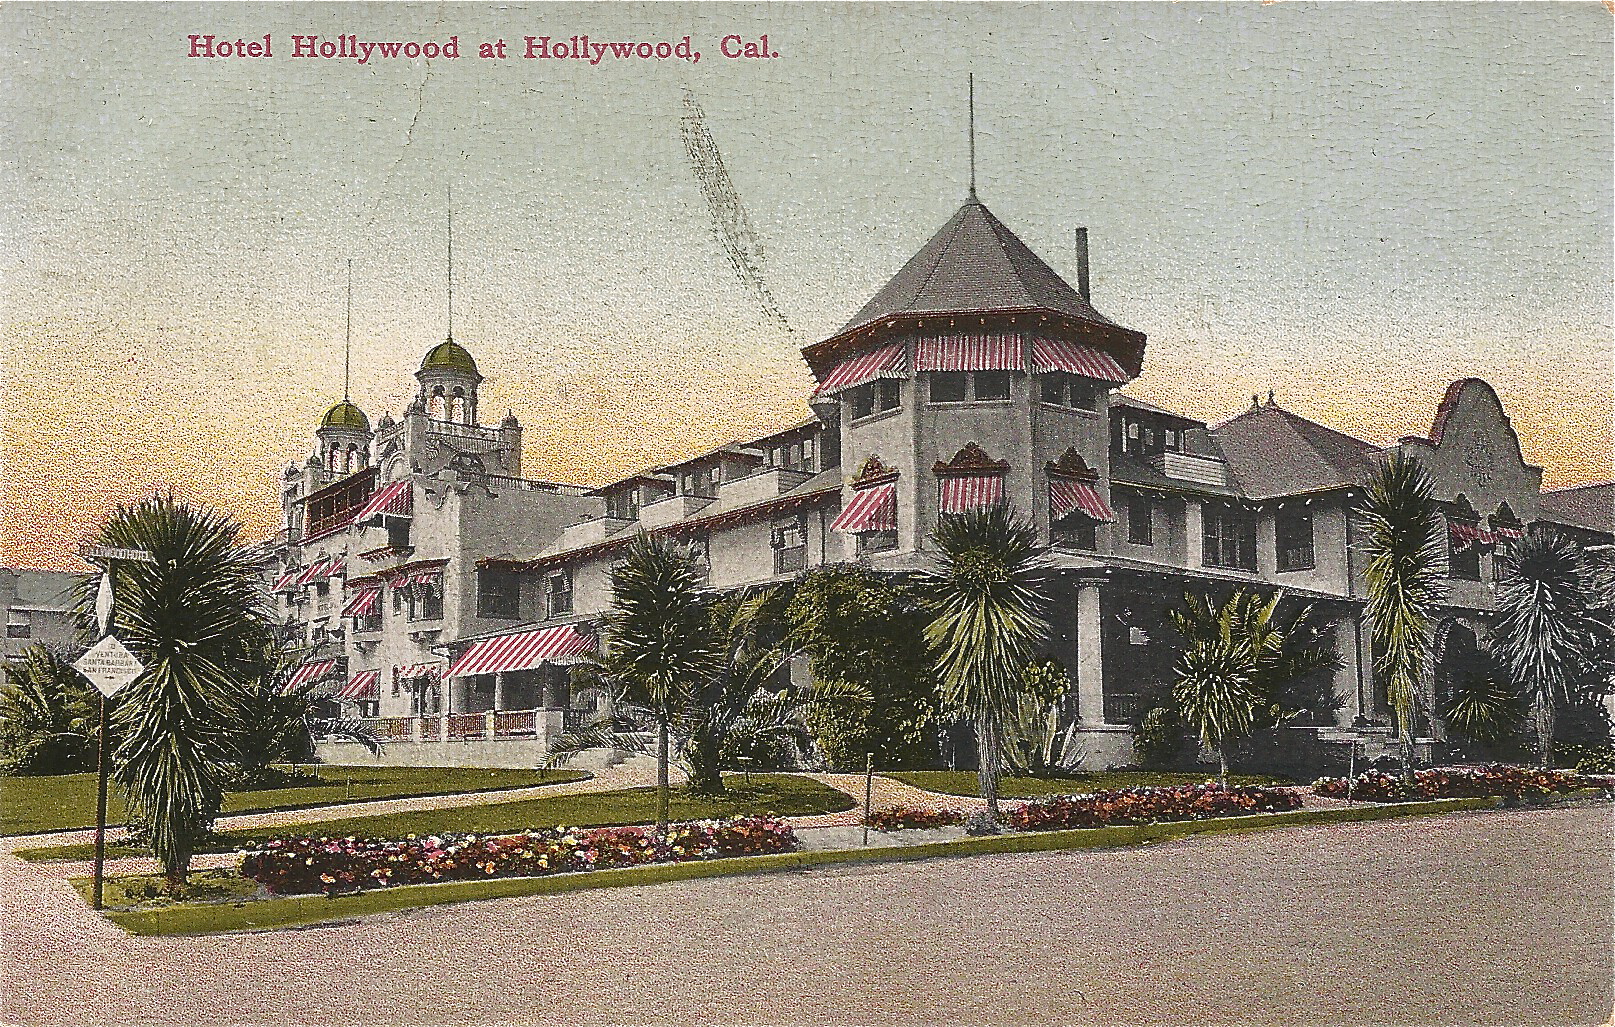 Hotel Hollywood, at the intersection of Hollywood & Highland